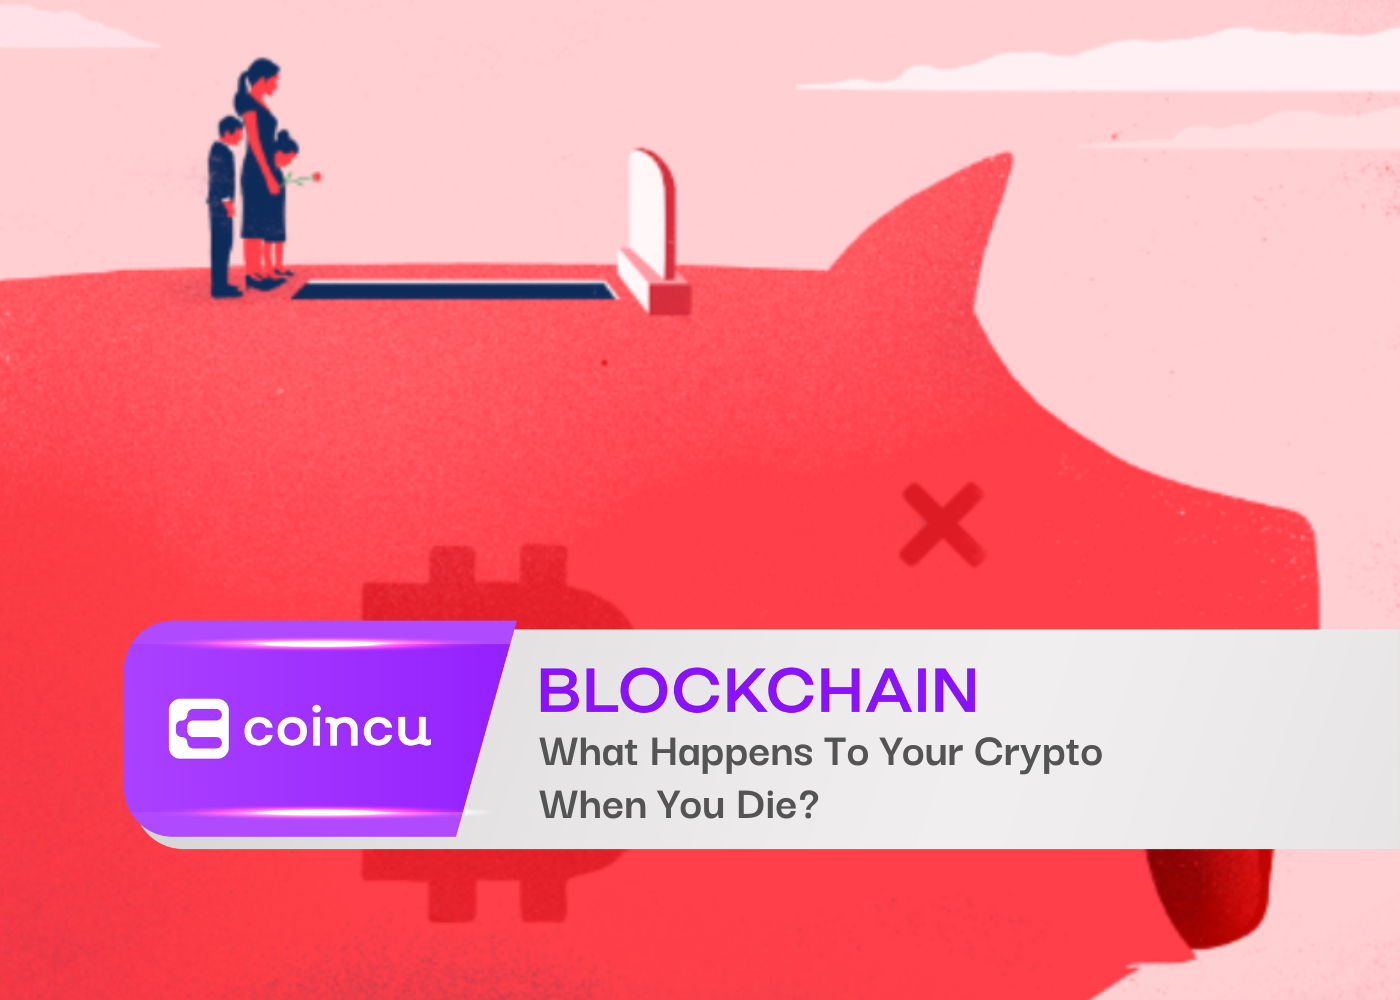 What Happens To Your Crypto When You Die?